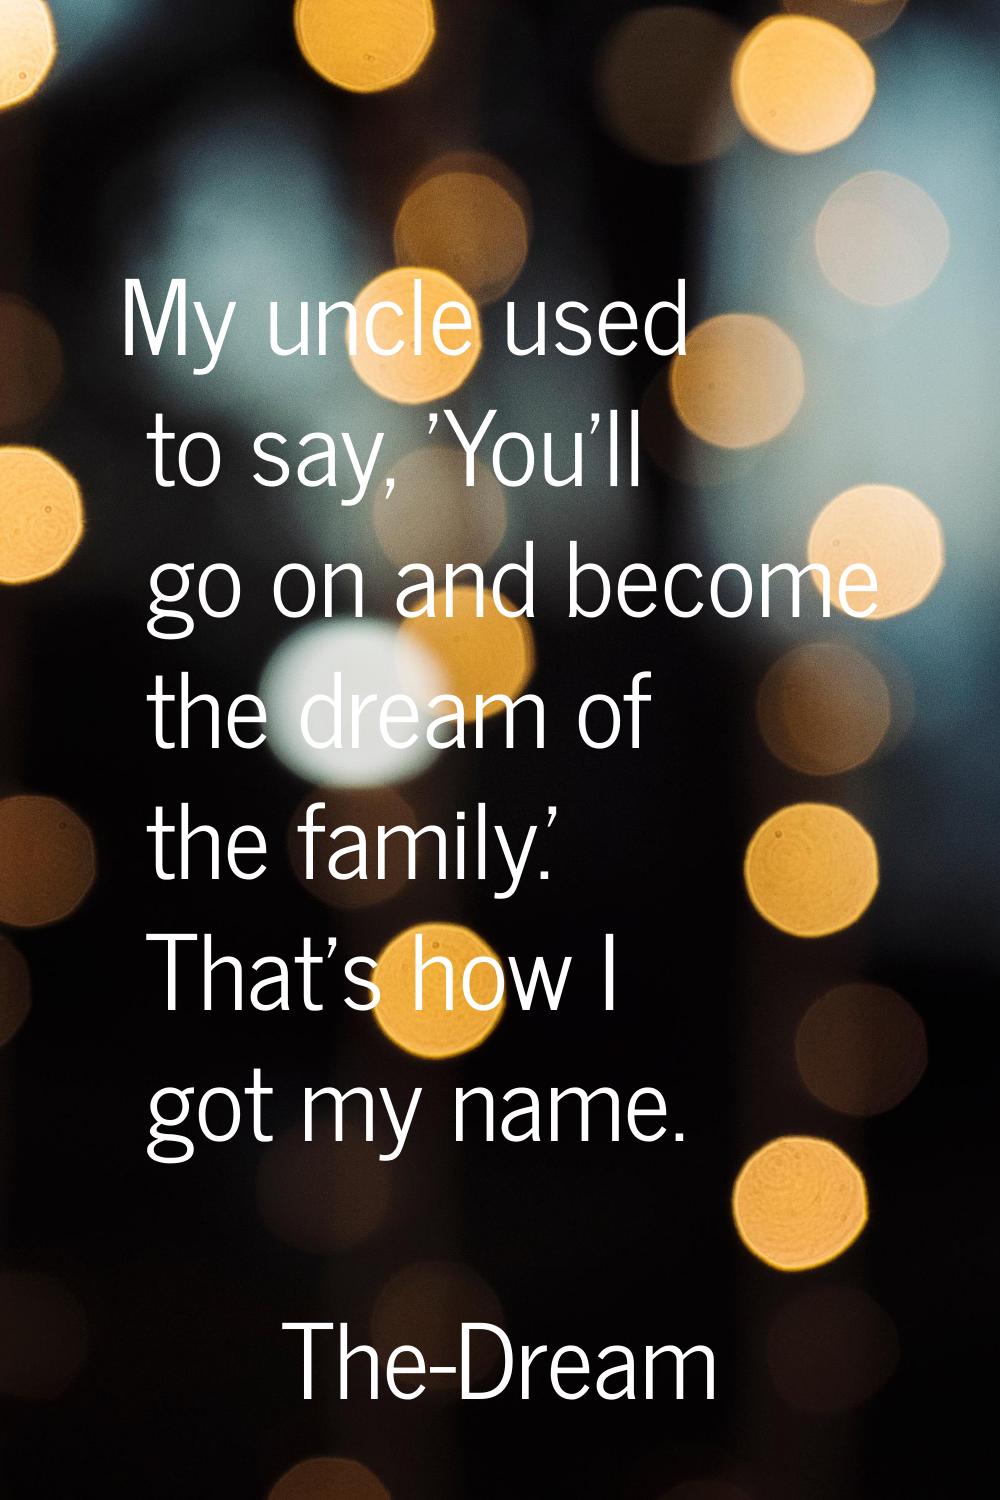 My uncle used to say, 'You'll go on and become the dream of the family.' That's how I got my name.